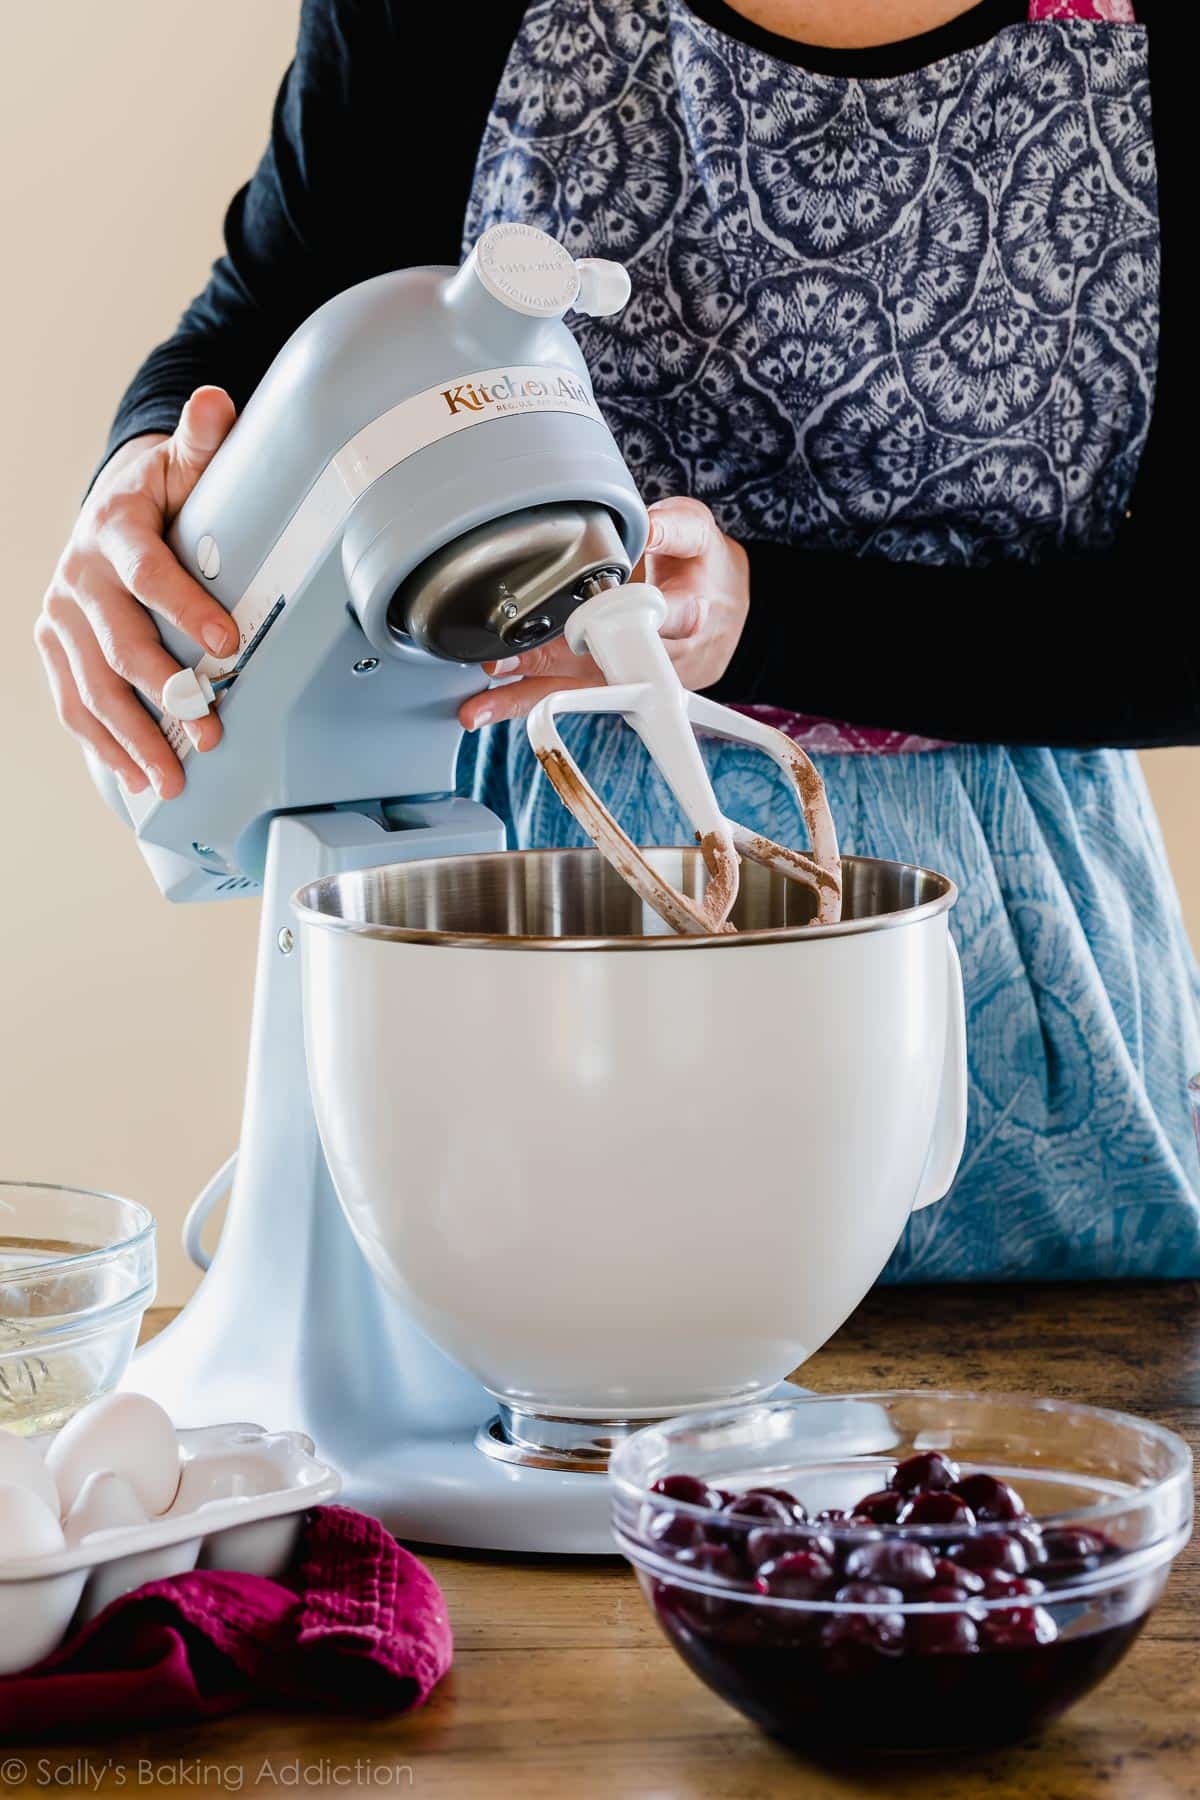 Limited Edition KitchenAid Stand Mixer in Misty Blue with chocolate cake batter